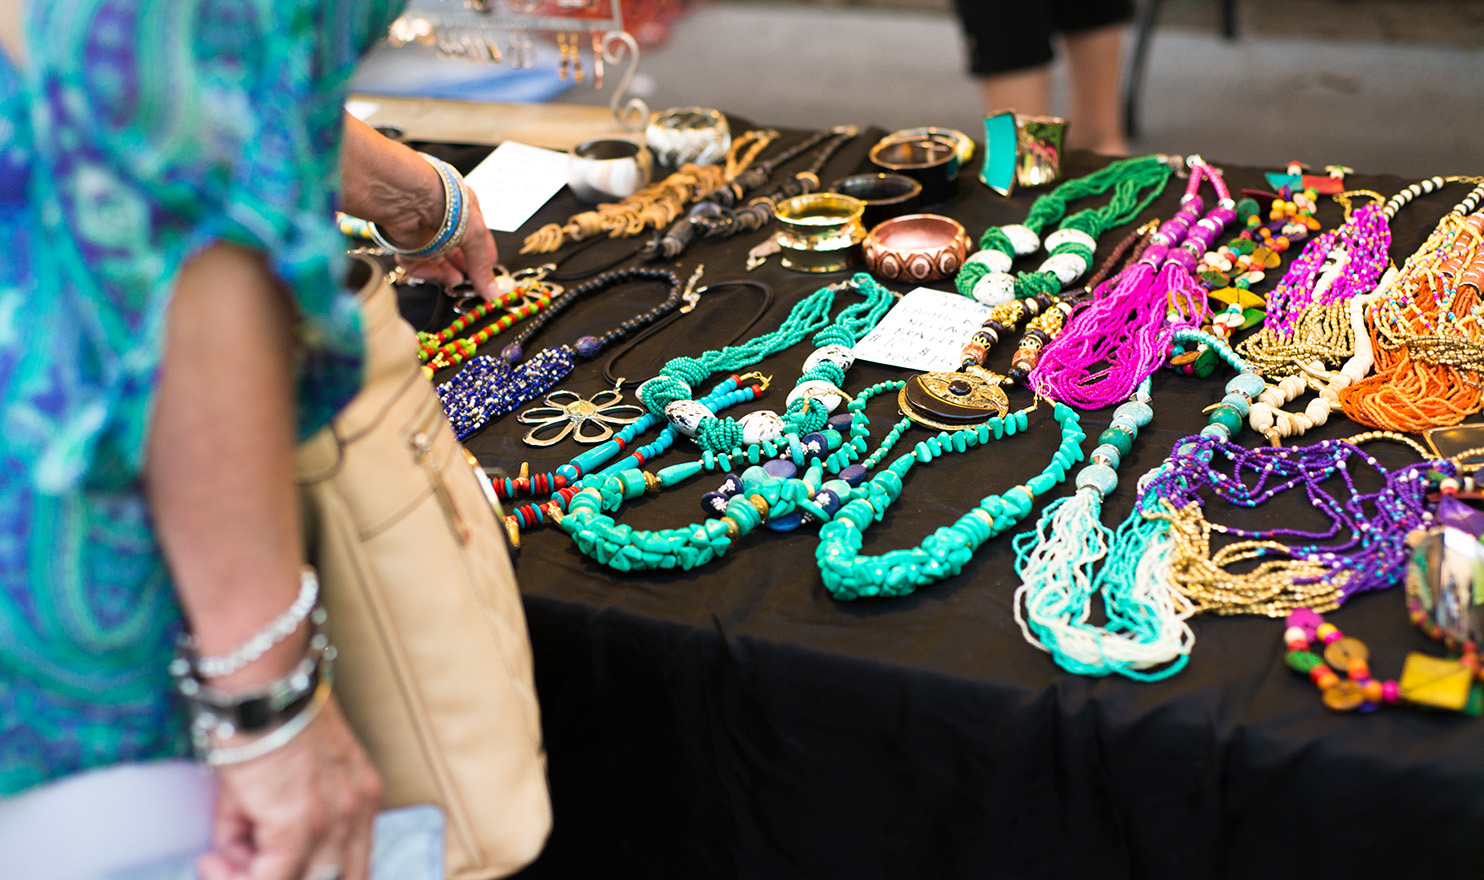 An event goer is looking at handmade necklaces out on display on a black table in a vendor's booth.